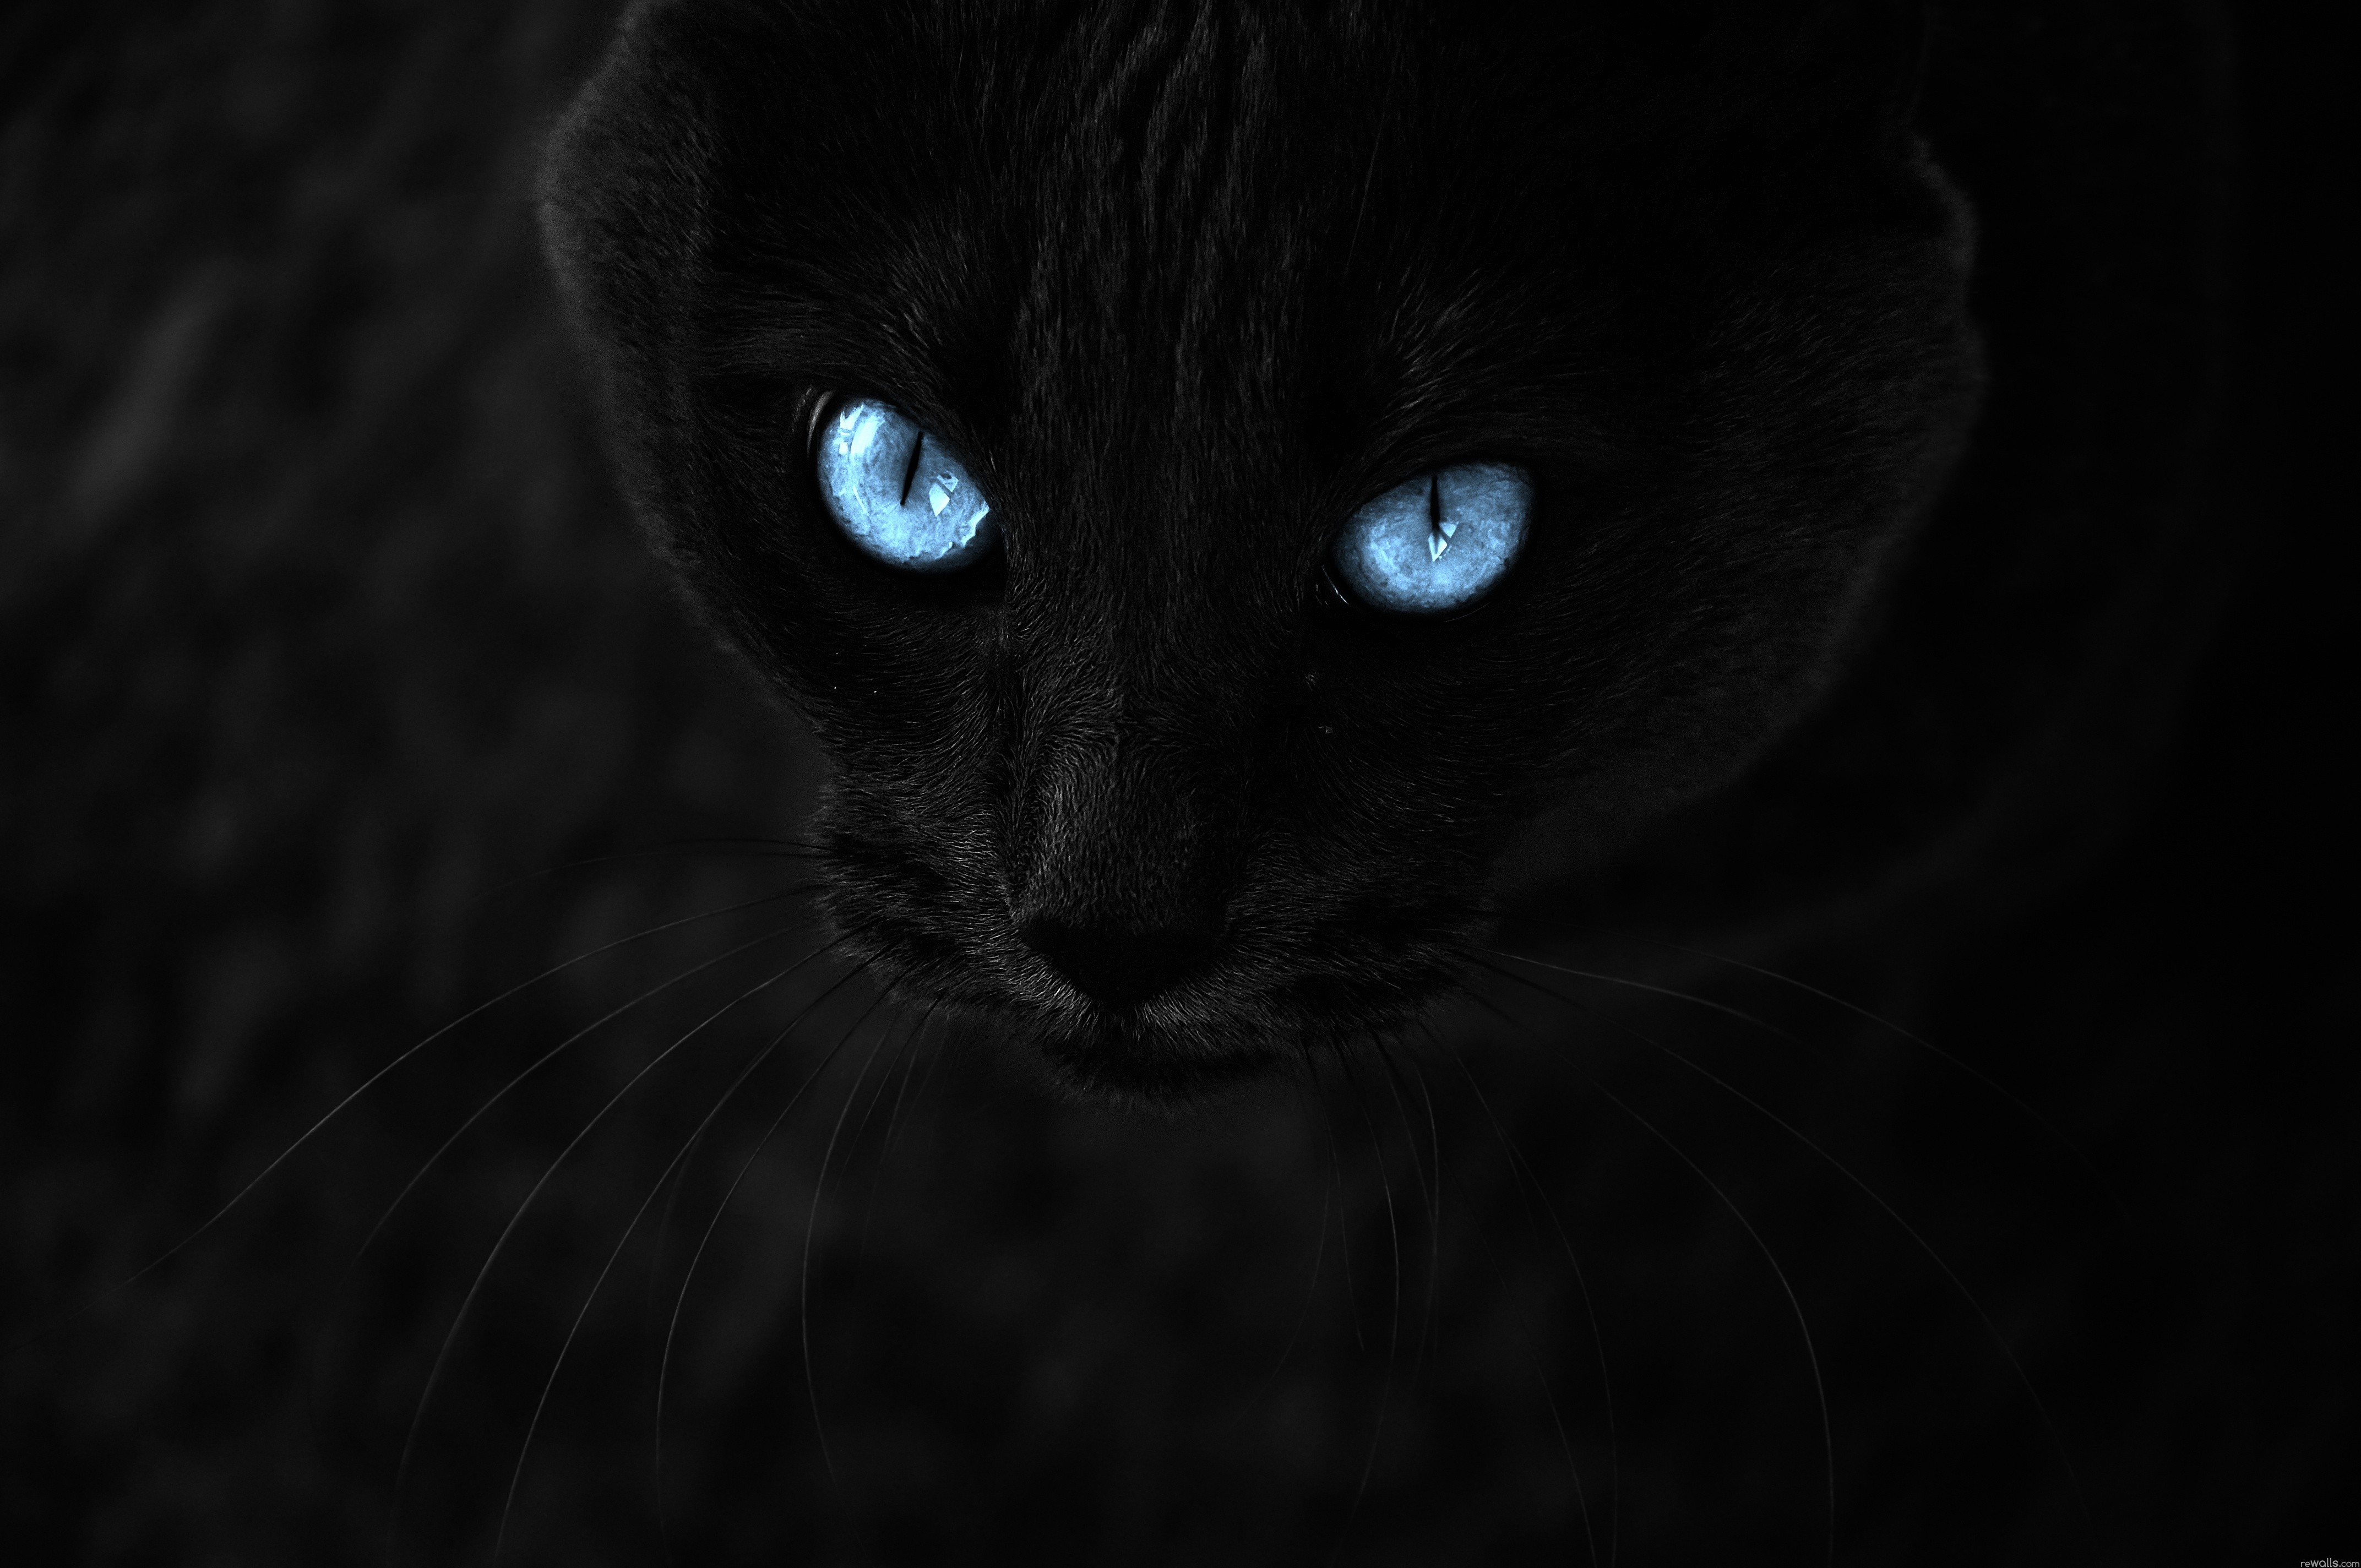  Blue  Cats  Eyes Wallpapers  HD  Desktop and Mobile Backgrounds 